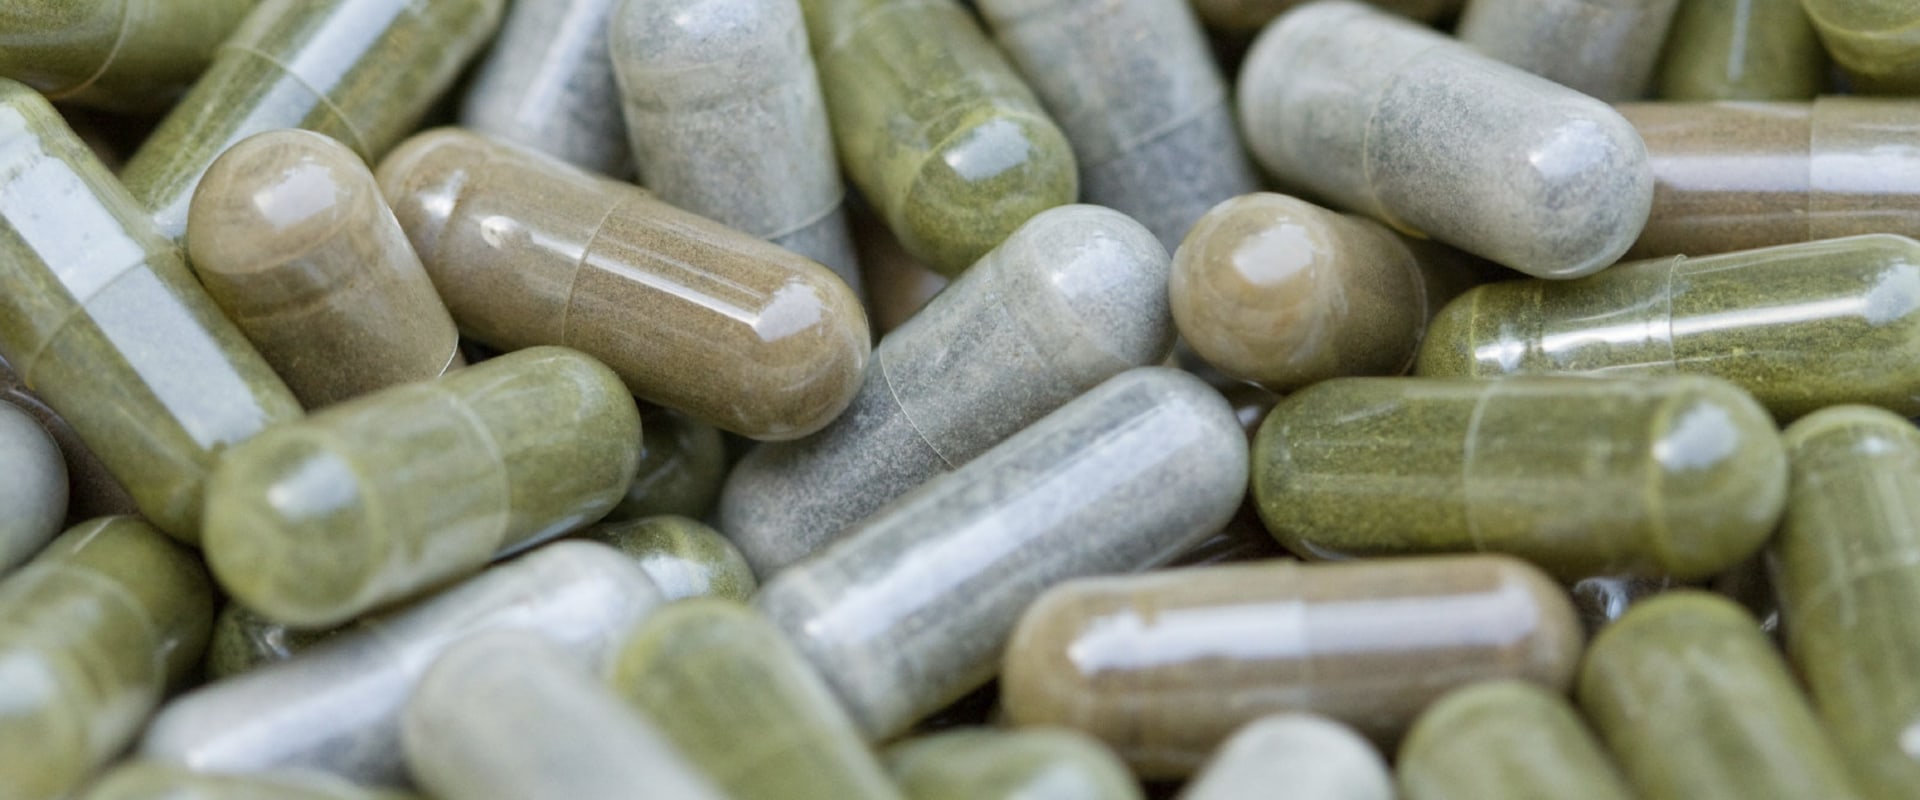 Are Dietary Supplements Safe for Specific Conditions or Illnesses?